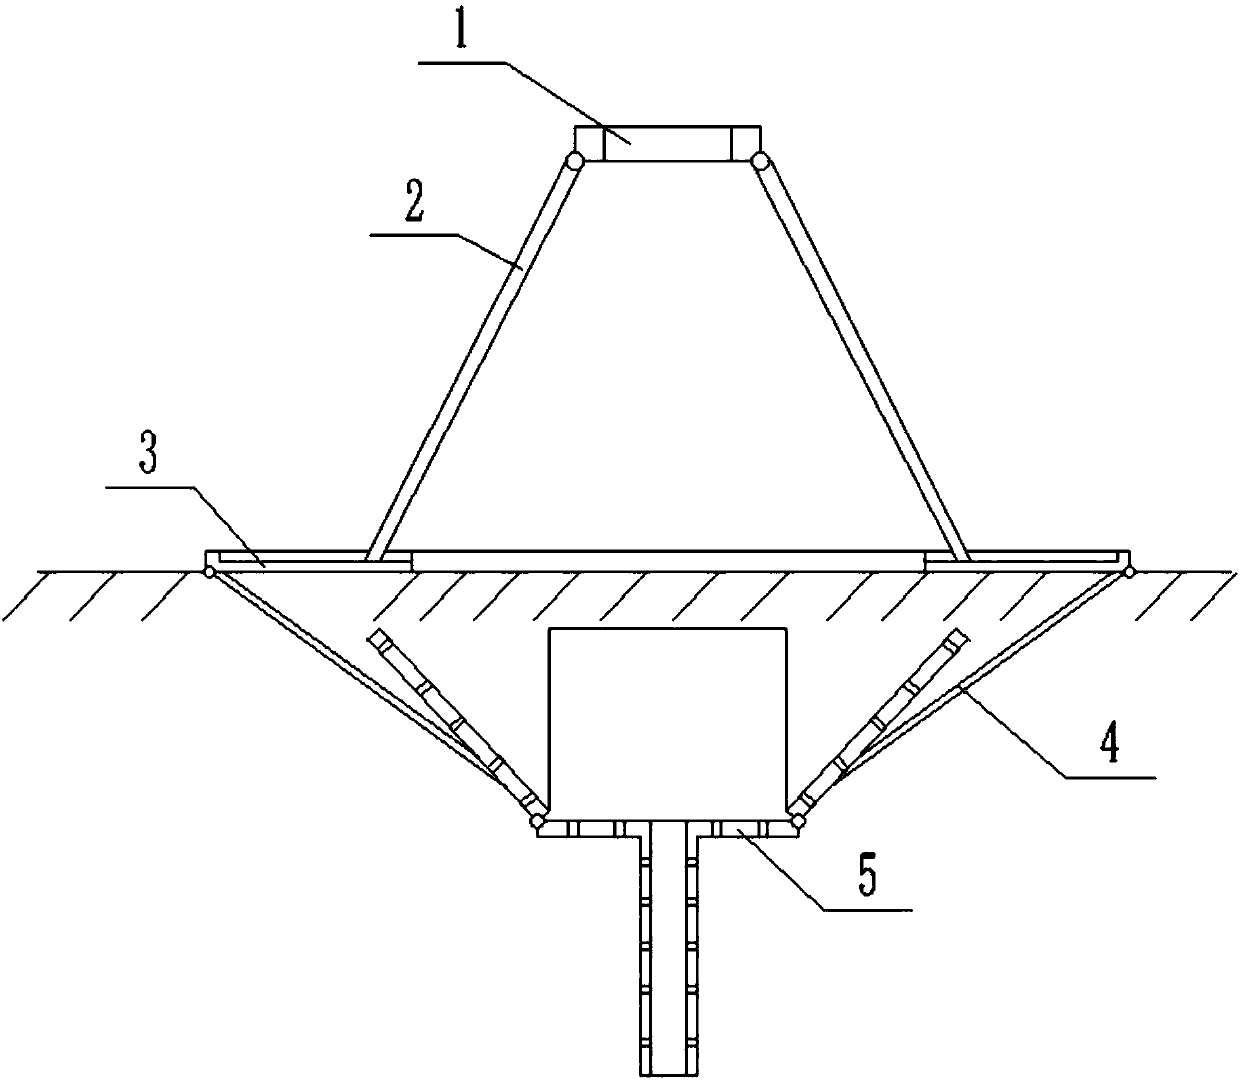 Supporting device for planting plants in gardens